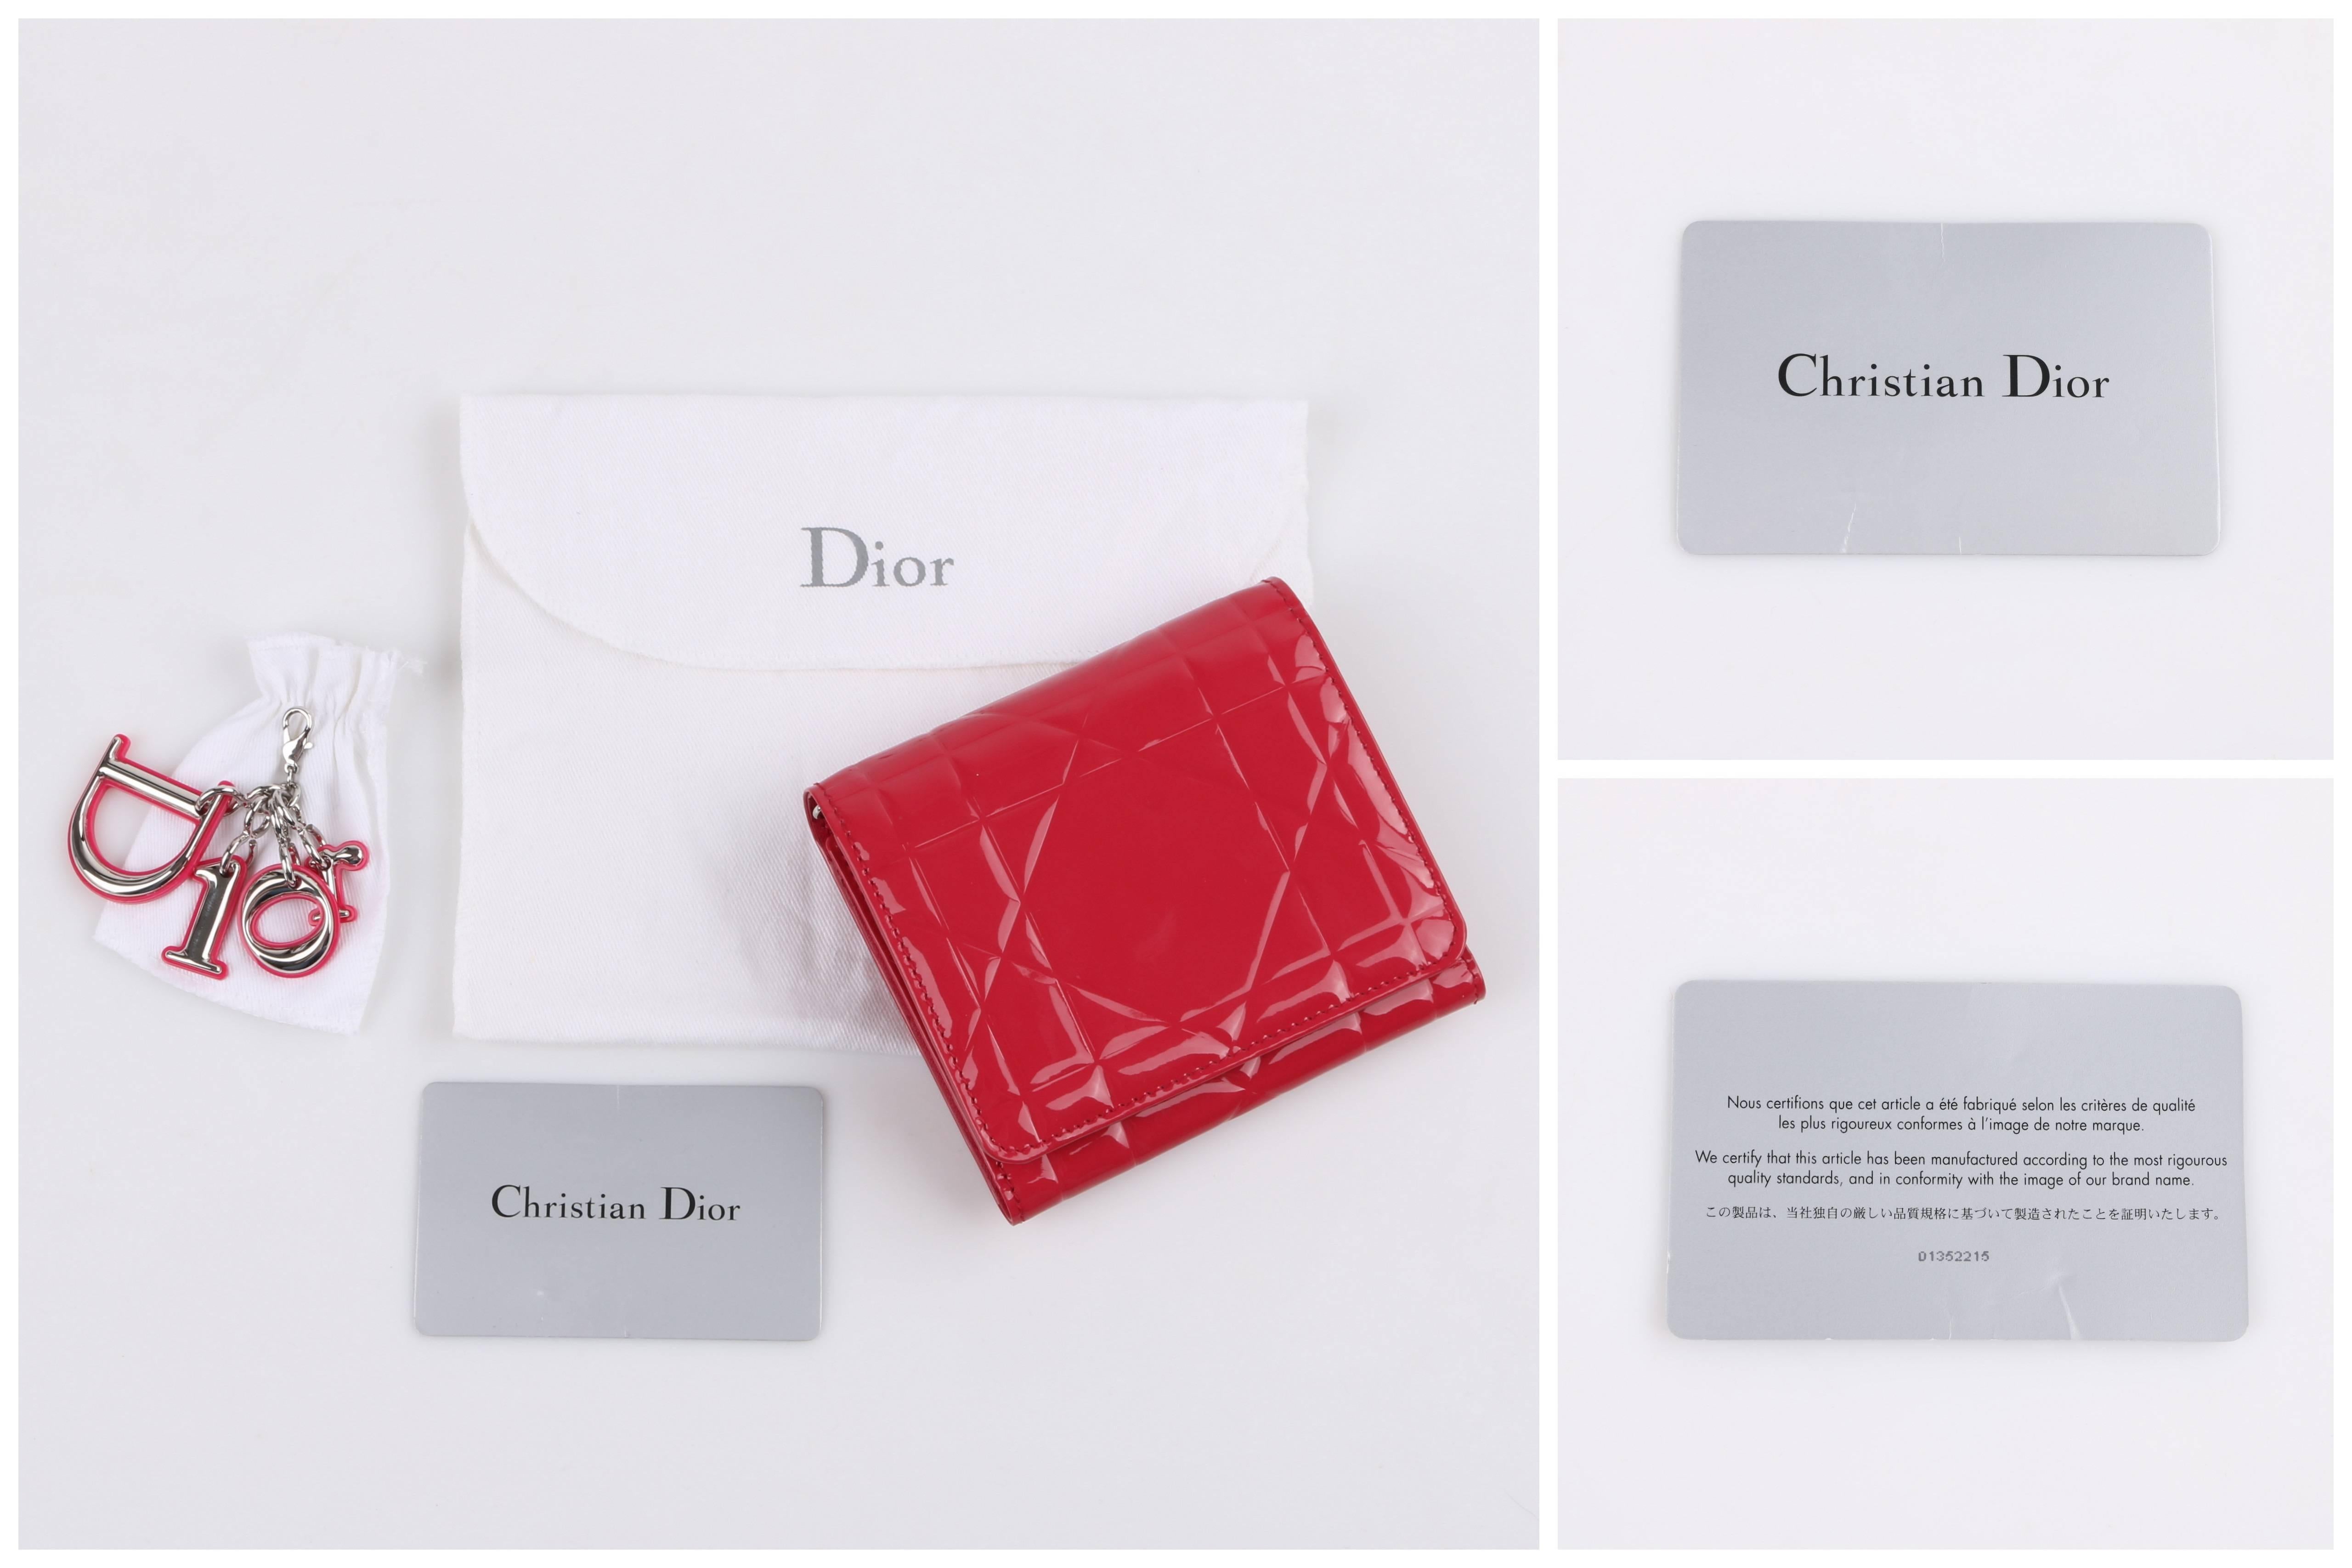 Dior Spring/Summer 2012 "Tutti Dior" fuchsia pink cannage patent leather tri-fold wallet. Cannage embossed glossy patent leather body. Tri-fold design with single snap closure. Lined in matte fuchsia leather. Seven interior card slots,